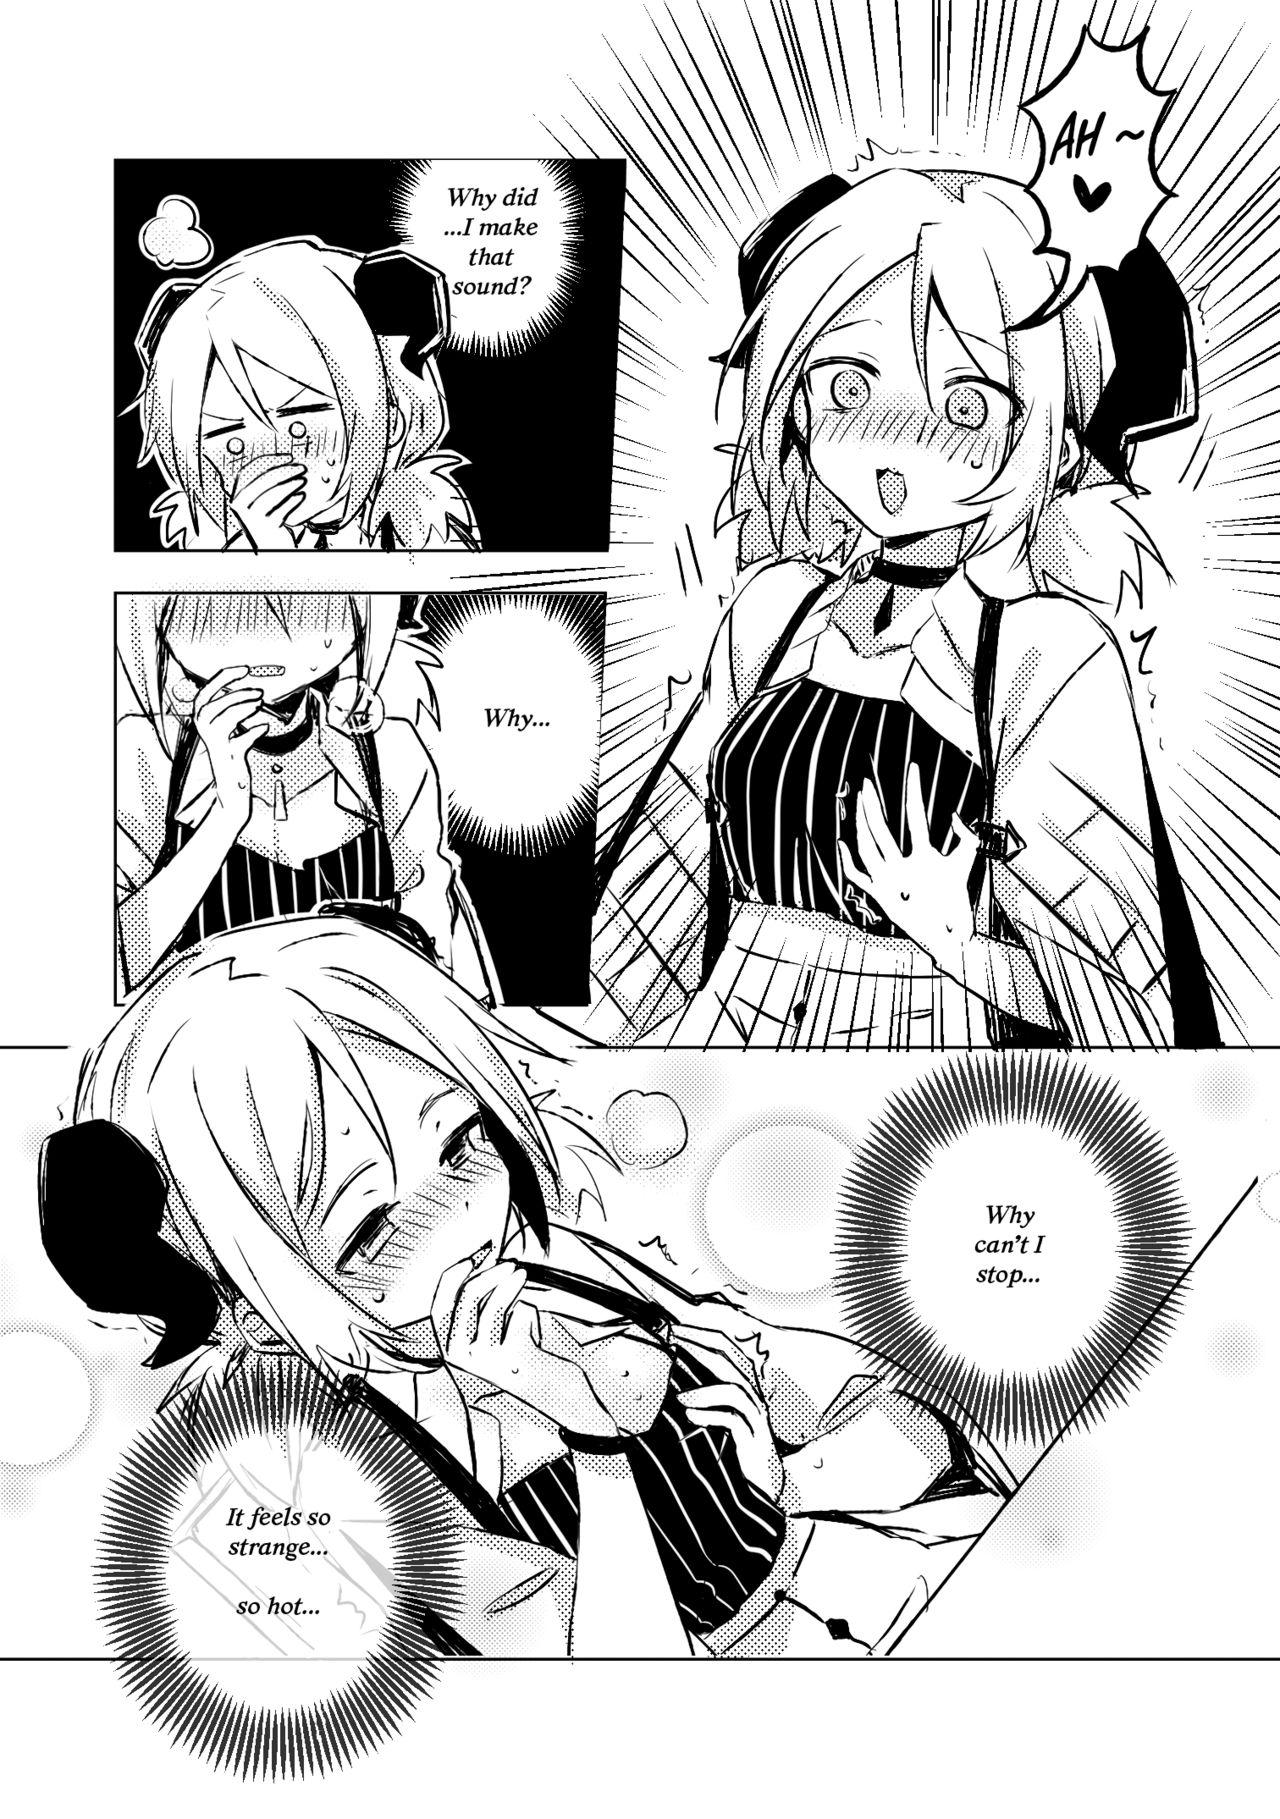 Skirt First time - Arknights Women Sucking - Page 2